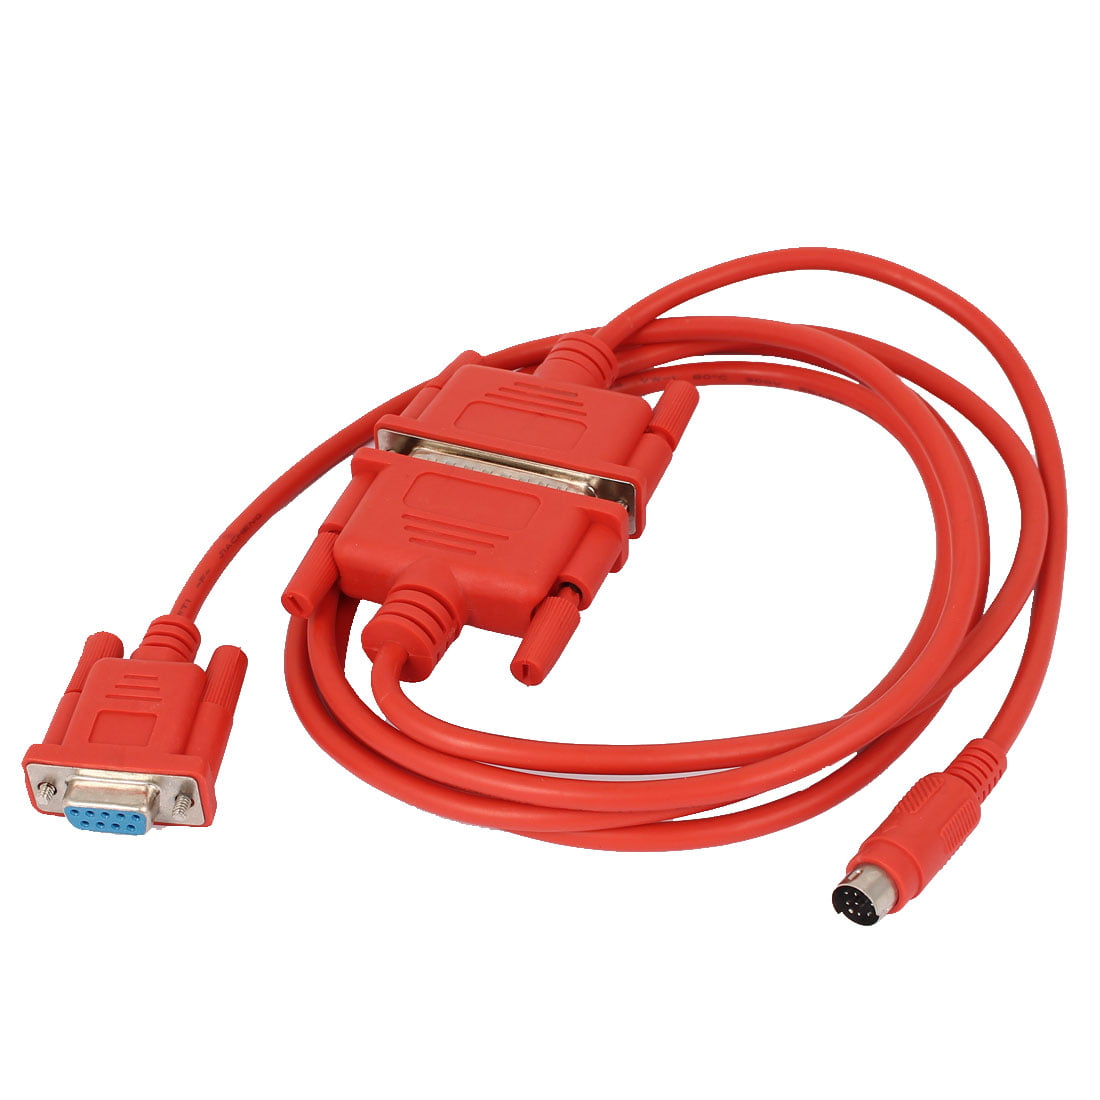 RS232 to RS422 Adapter Cable for Mitsubishi SC-09 Melsec FX A PLC 5.2 Ft Long Redby KPSheng 